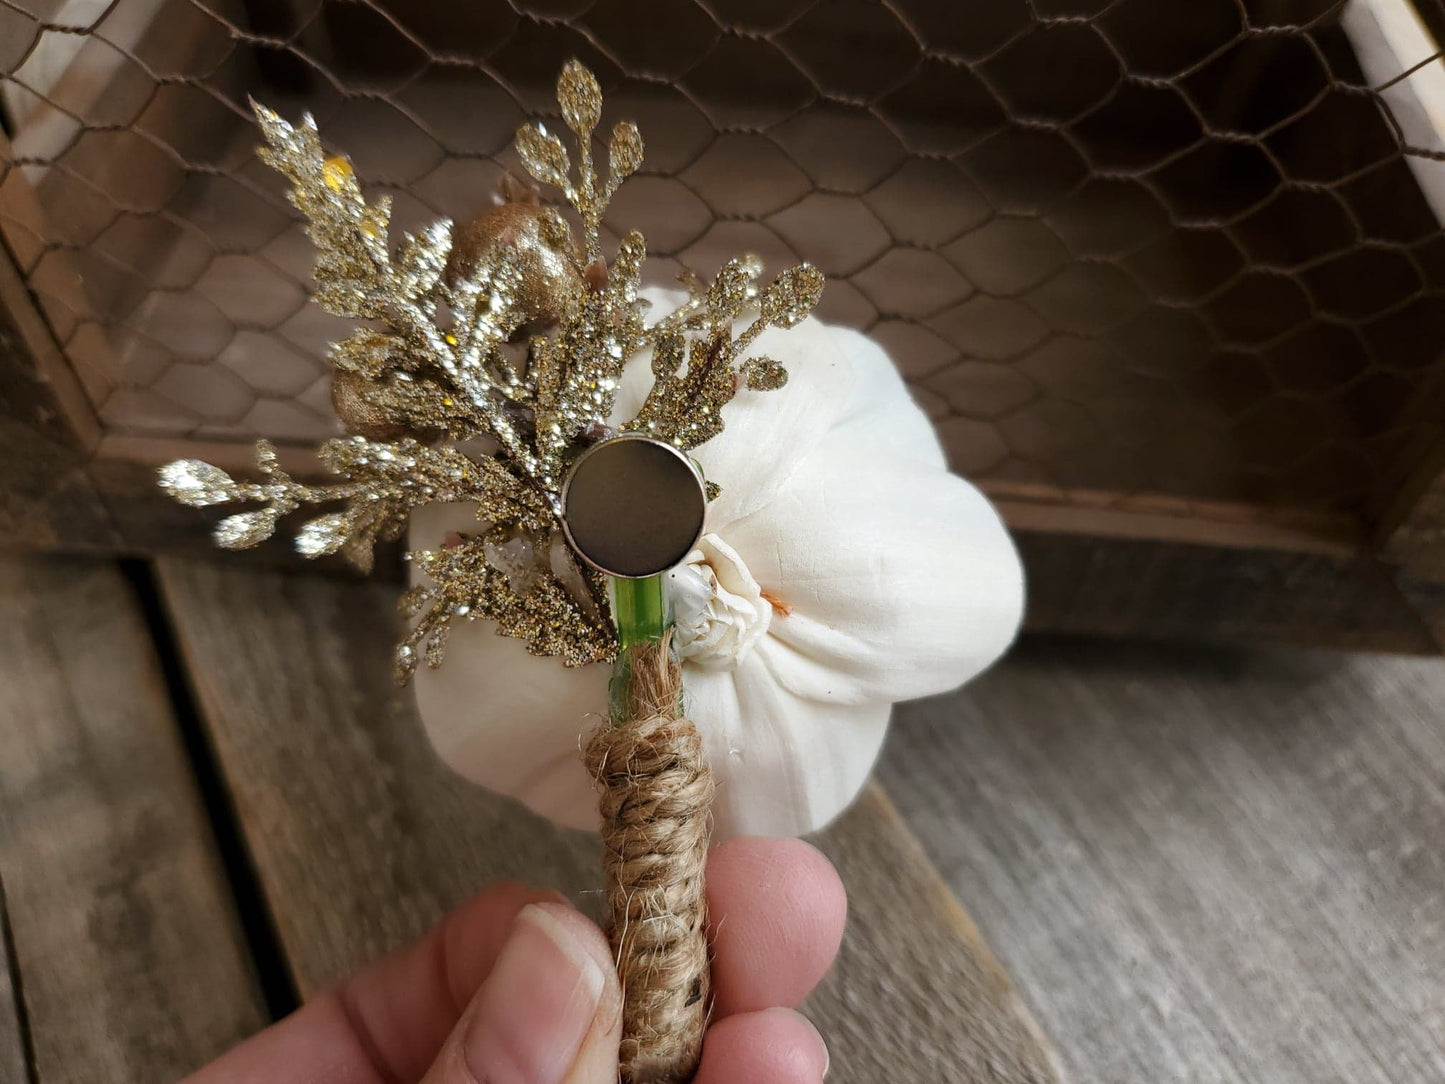 Wood Flower Boutonniere for Groom, Groomsmen Boutonnieres, Father of the Bride Boutonniere, Pinned Flower Lapel Pin